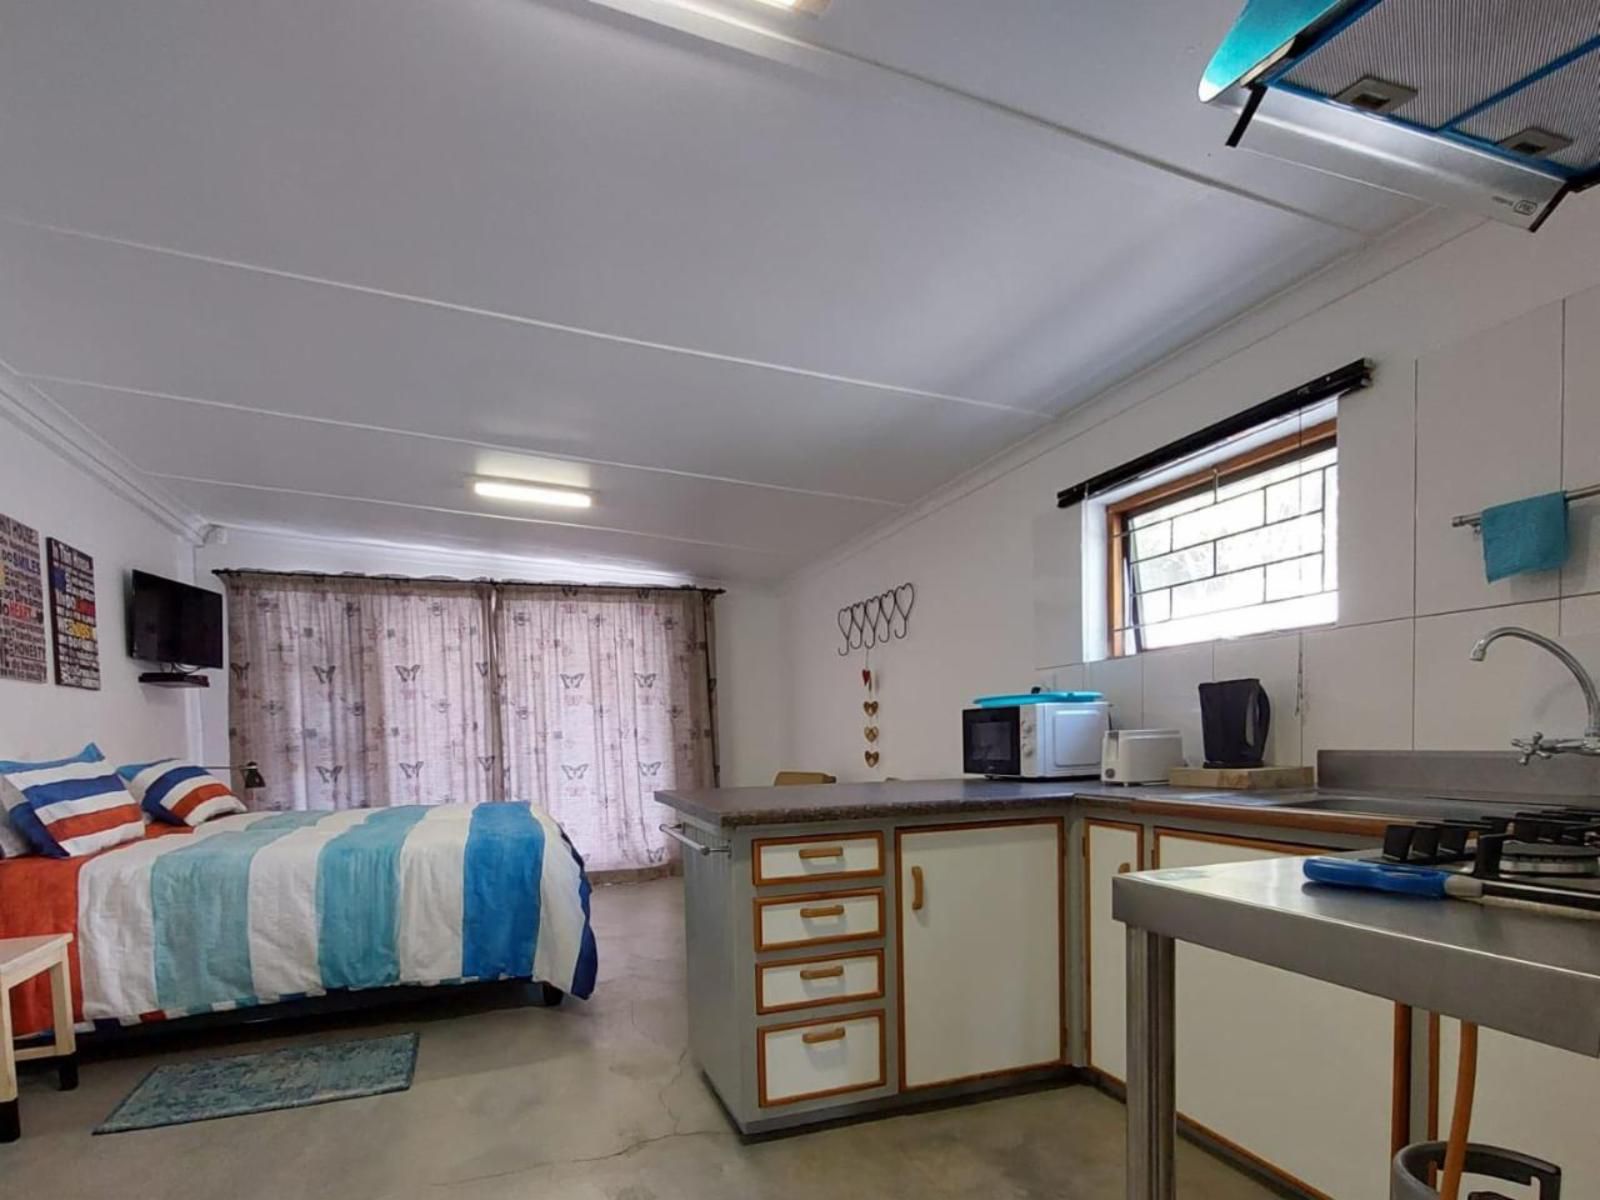 High Level Self Catering Lagulhas Agulhas Western Cape South Africa Unsaturated, Window, Architecture, Bedroom